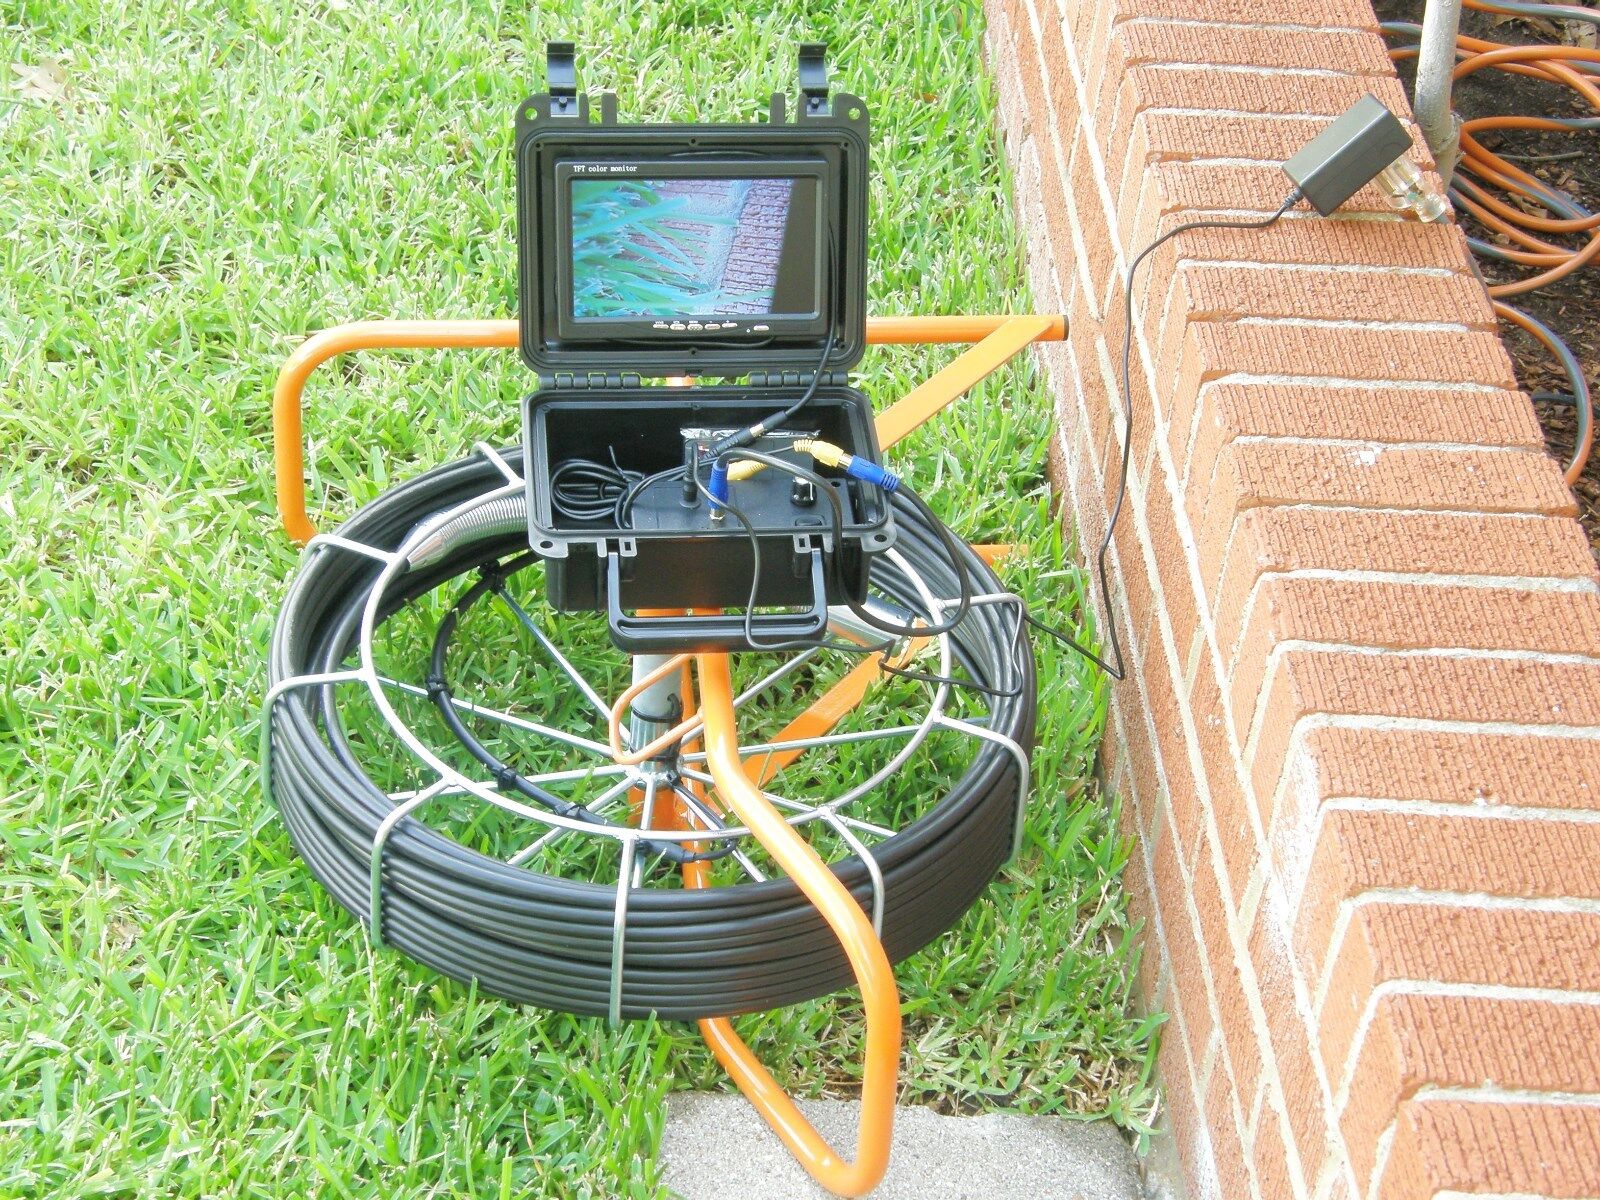 100 foot pipe inspection camera, sewer main inspection, 100' ft video scope